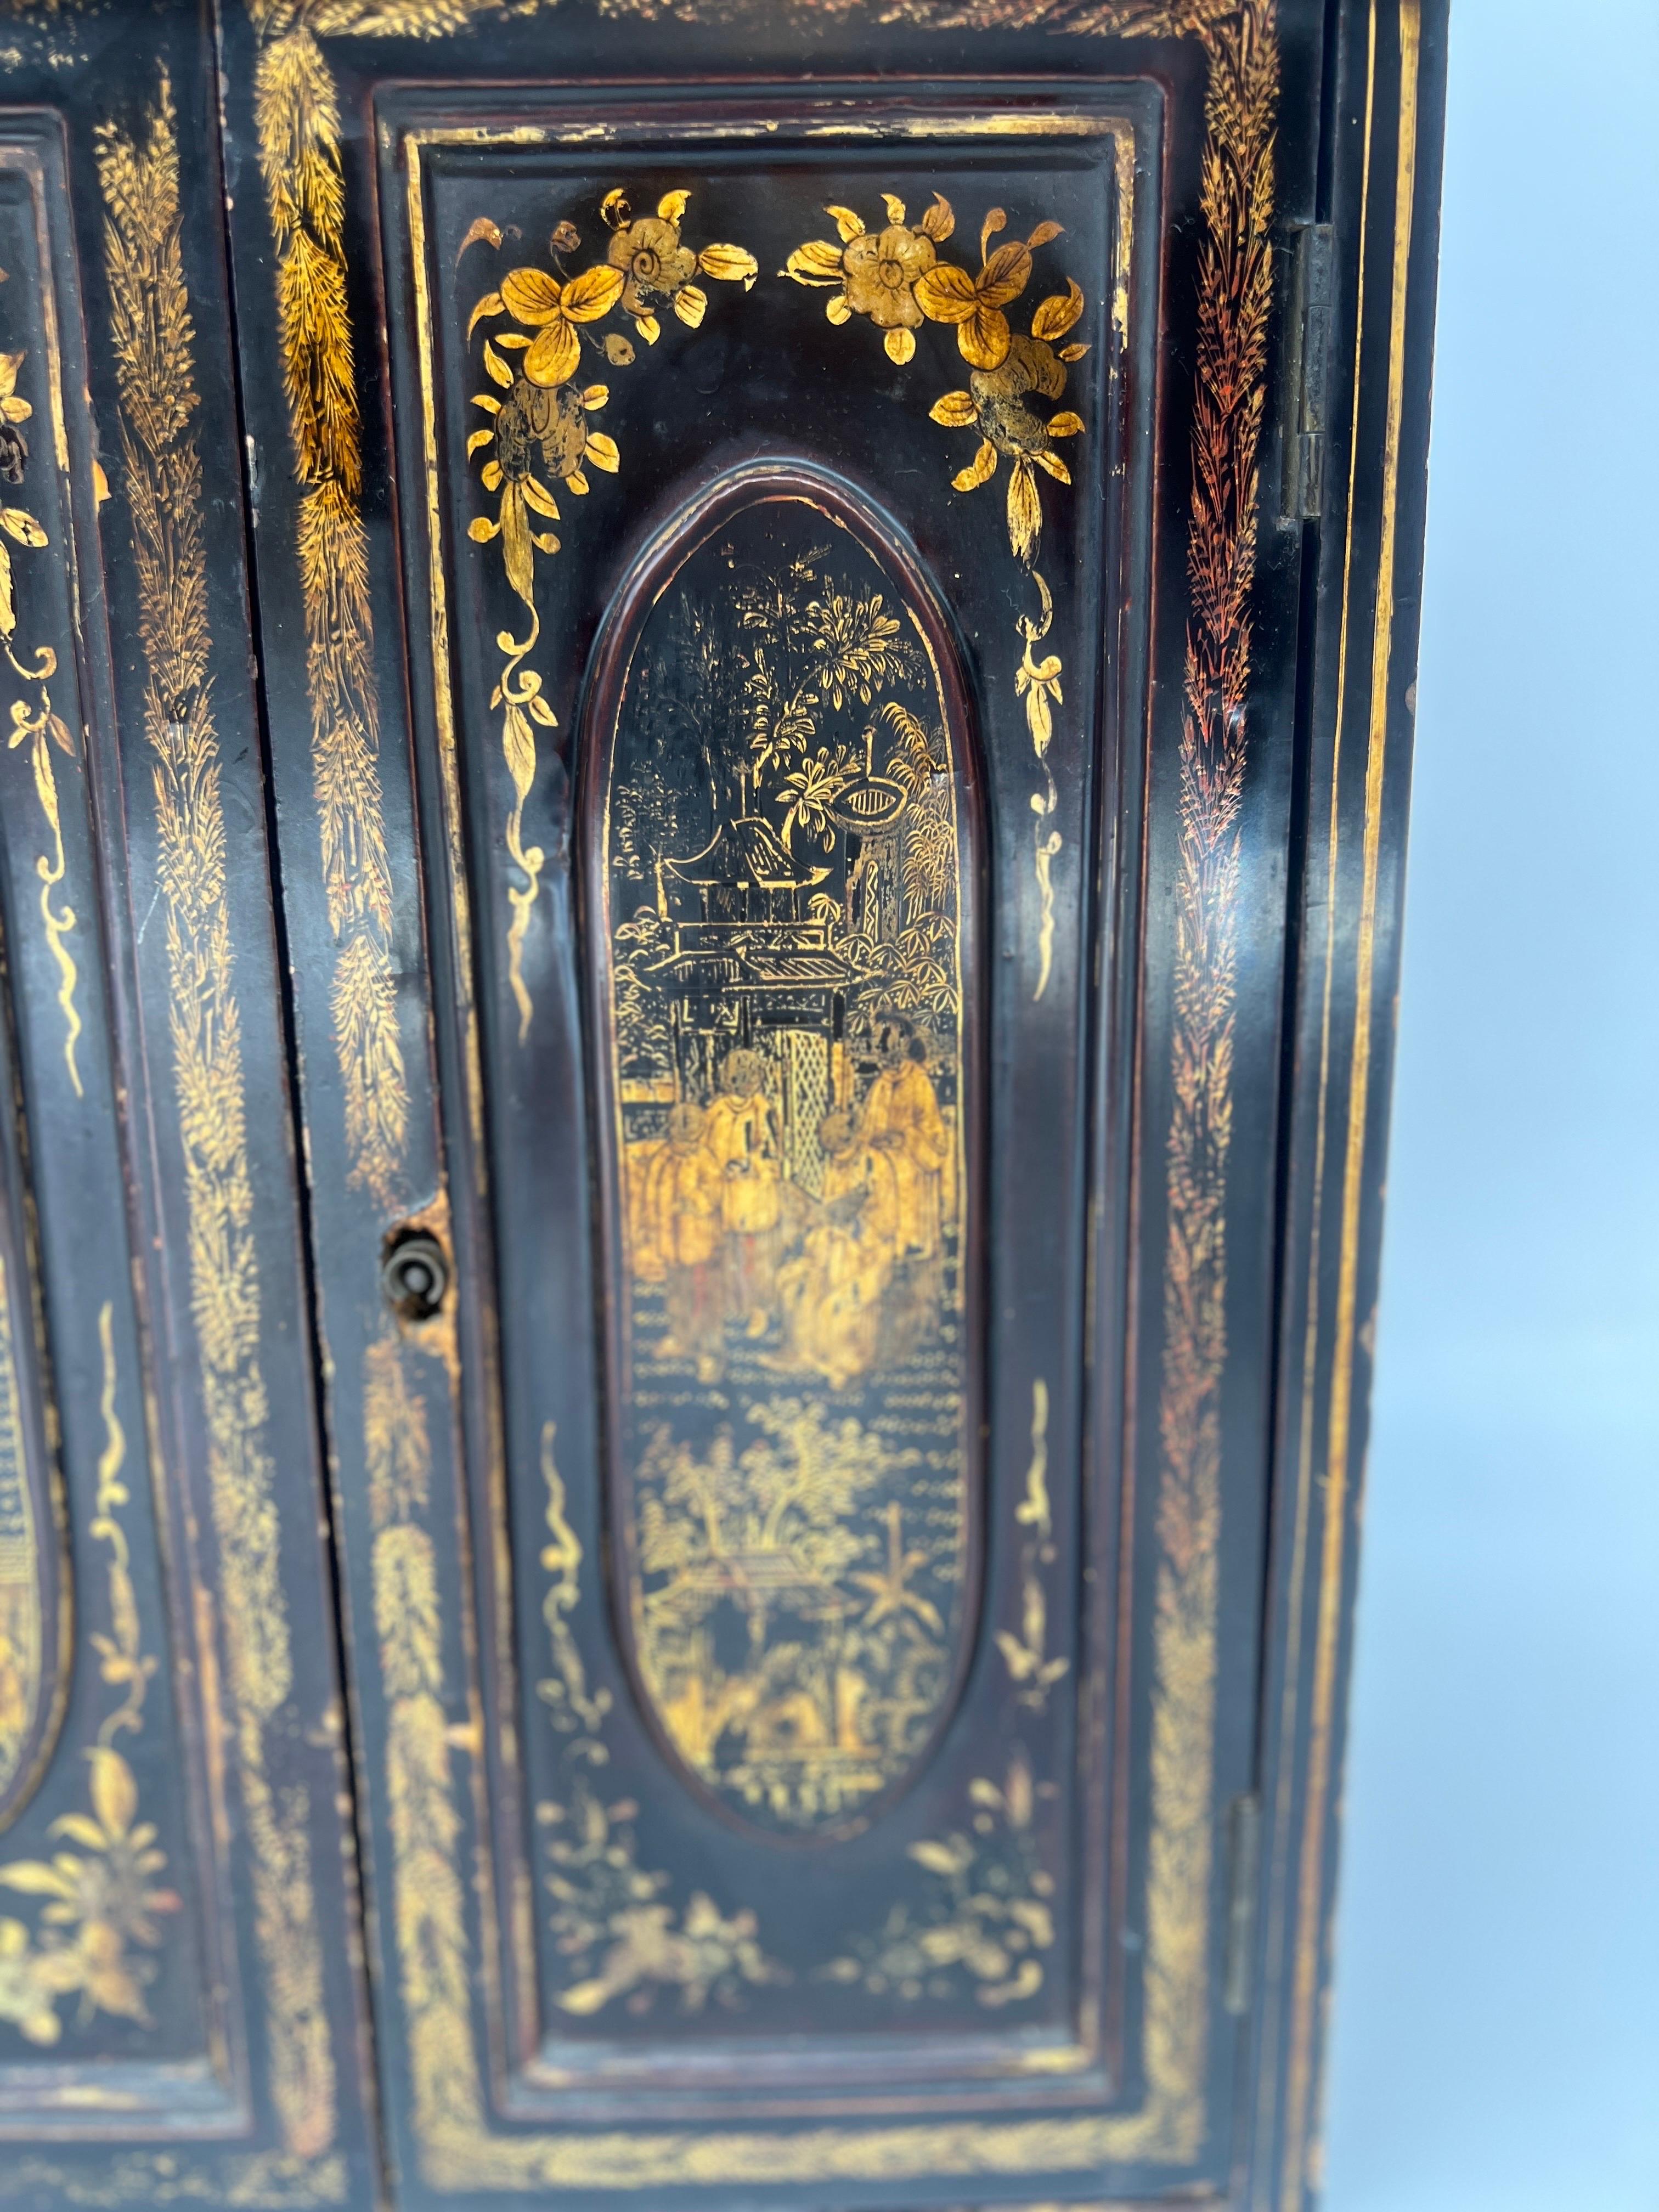 Wood Antique Chinese Export Chinoiserie Decorated Collector or Jewelry Cabinet